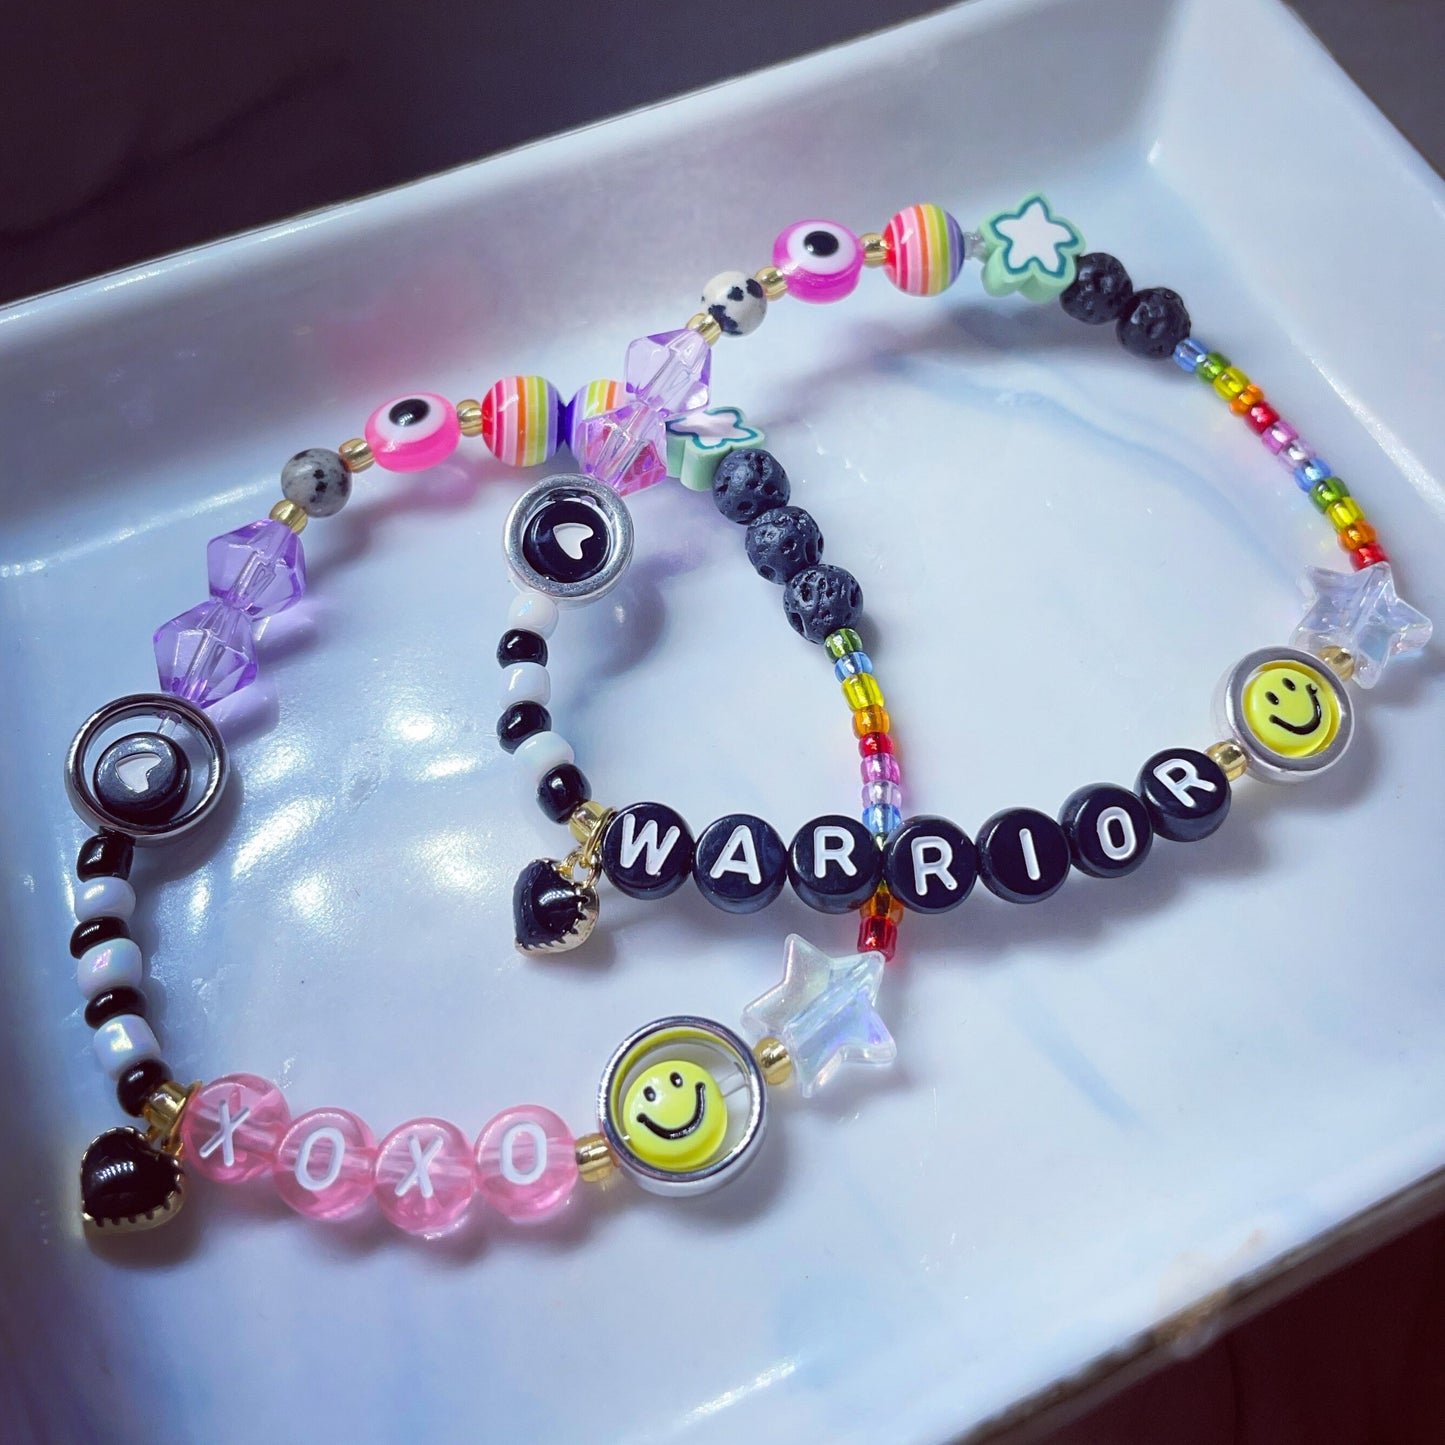 Fidget spinning bracelet personalised mixed bead monochrome rainbow smiley and hearts